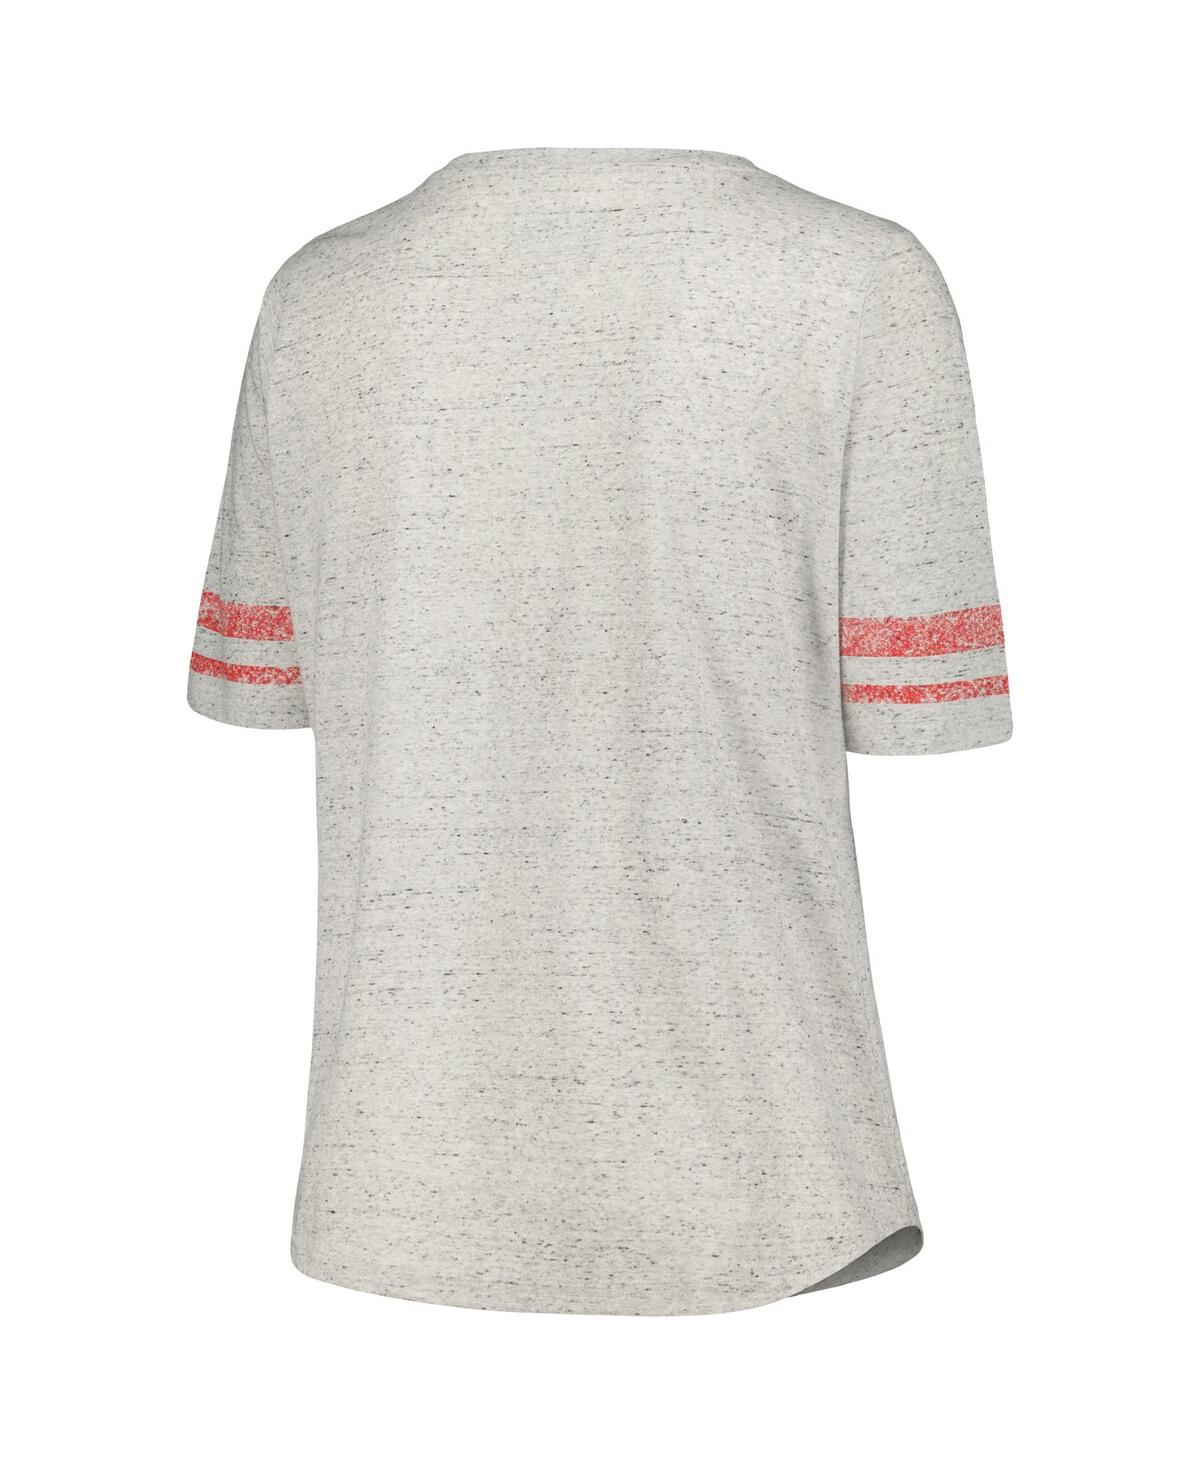 Shop Profile Women's  Heather Gray Ohio State Buckeyes Plus Size Striped Lace-up T-shirt